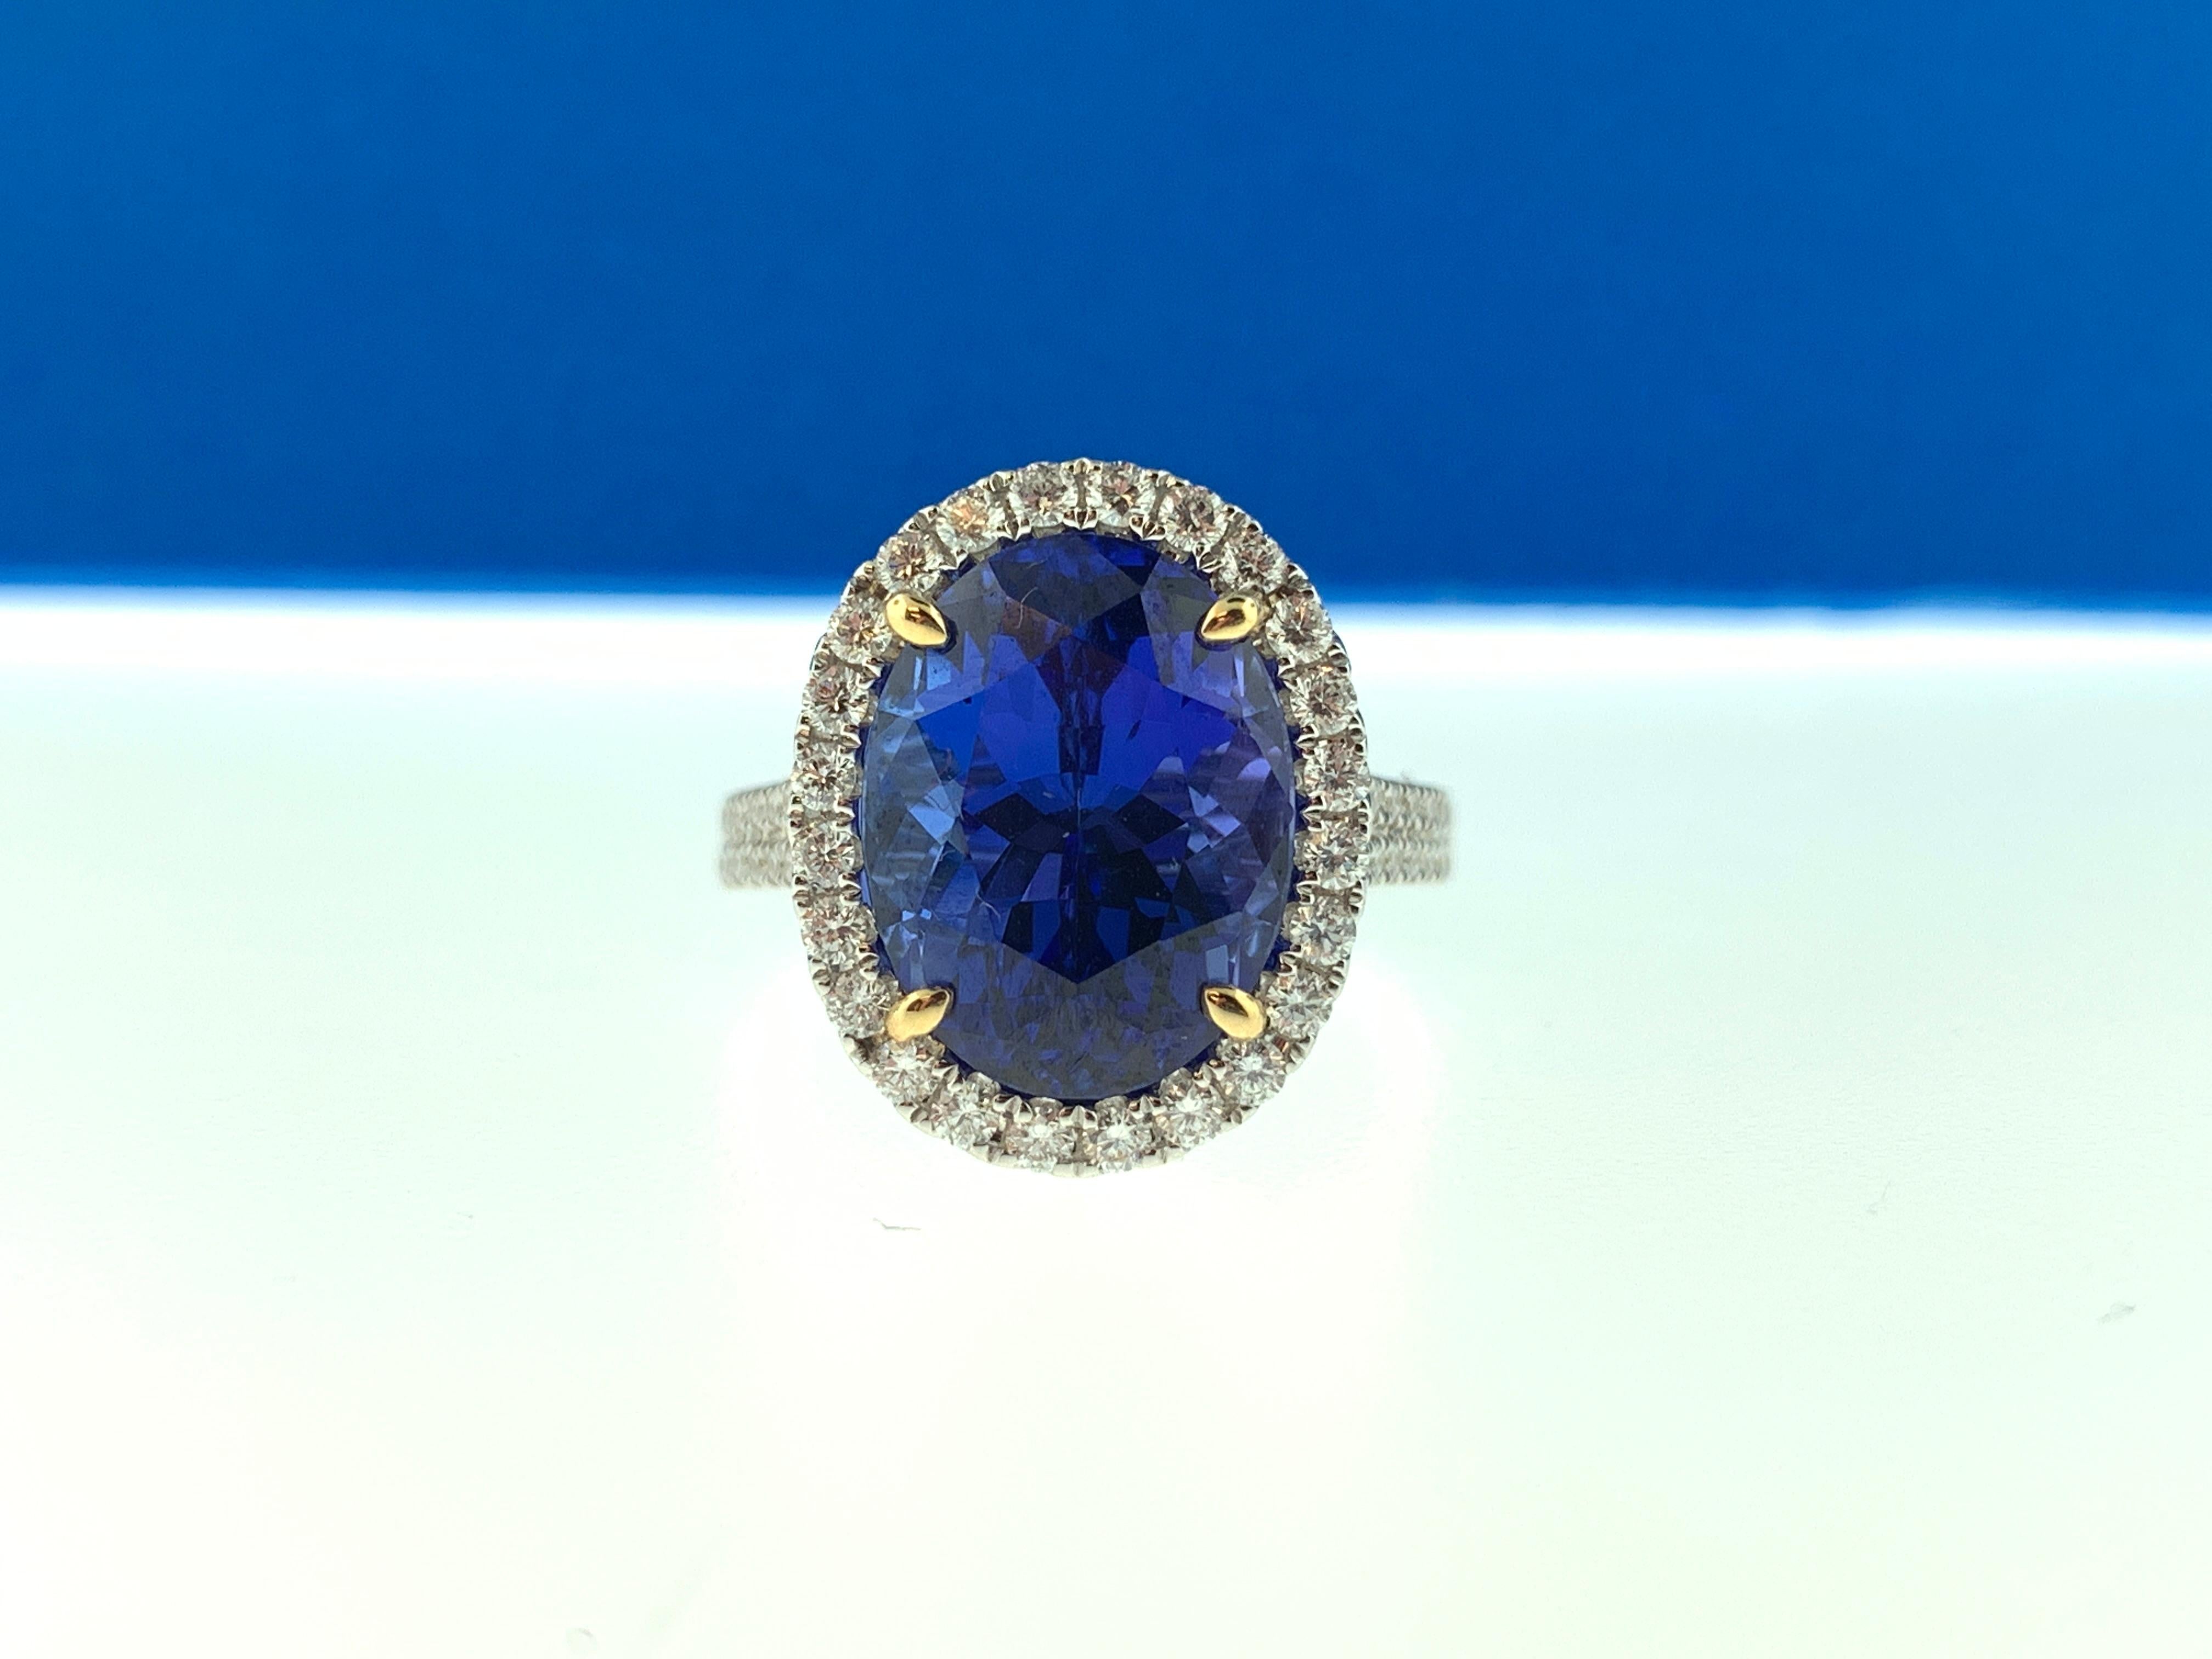 This stunning cocktail ring showcases a beautiful 8.95 carat oval tanzanite with a diamond halo, sitting in a diamond encrusted basket. The ring has a double diamond shank and is set in 18 karat white gold, with 18k yellow gold prongs on the